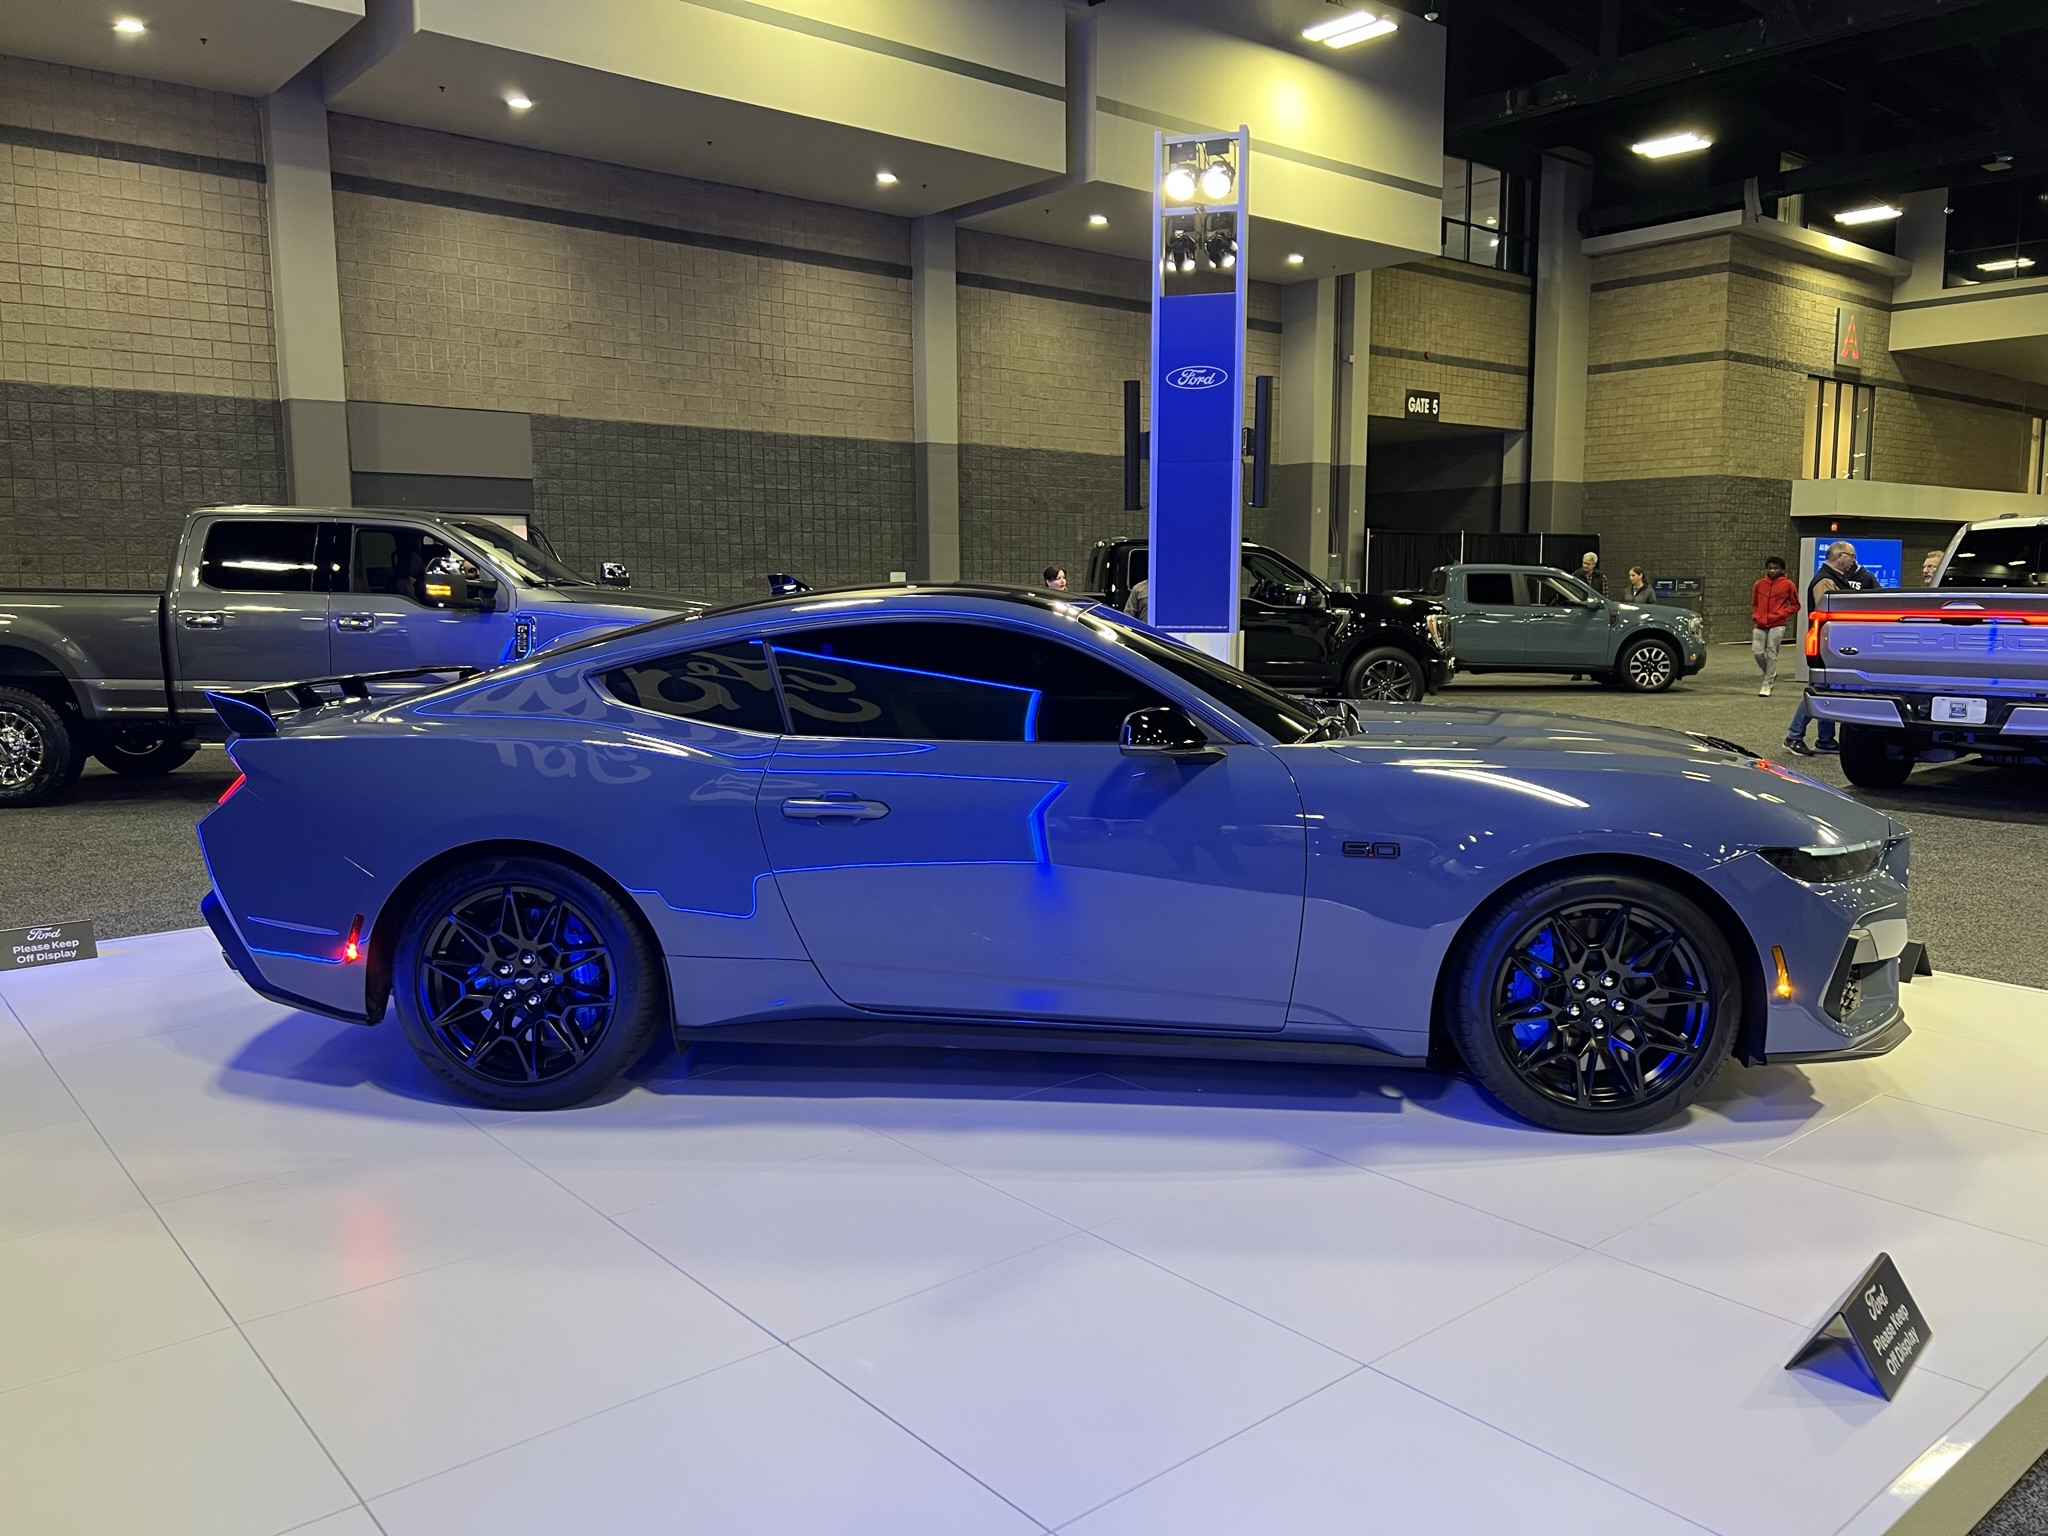 S650 Mustang S650 GT @ Charlotte Auto Show IMG_1799.JPEG